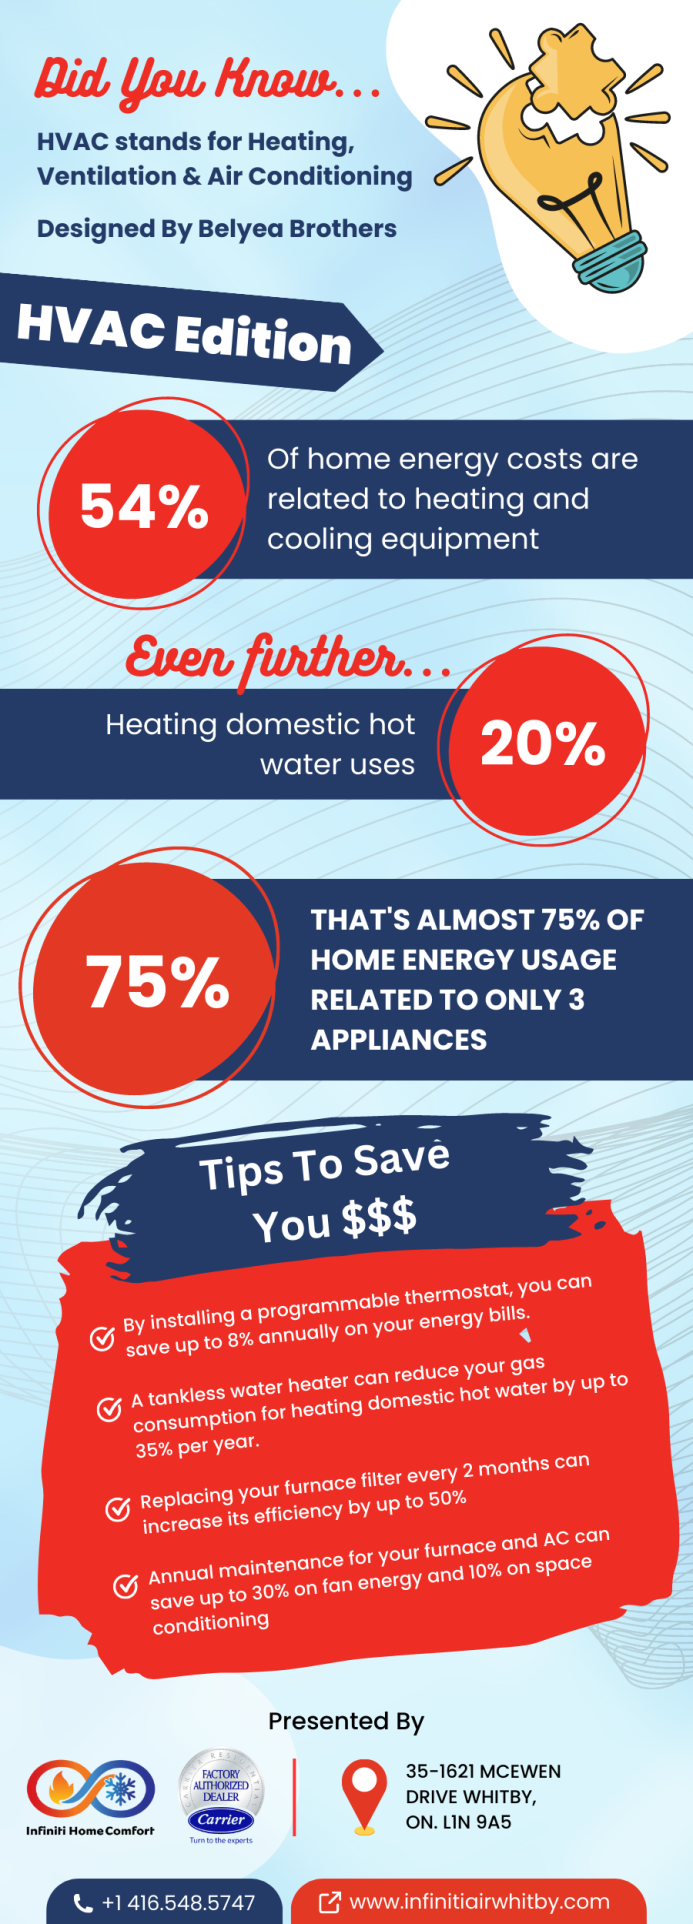 Top HVAC Facts to Lower Your Energy Bills and Save Money